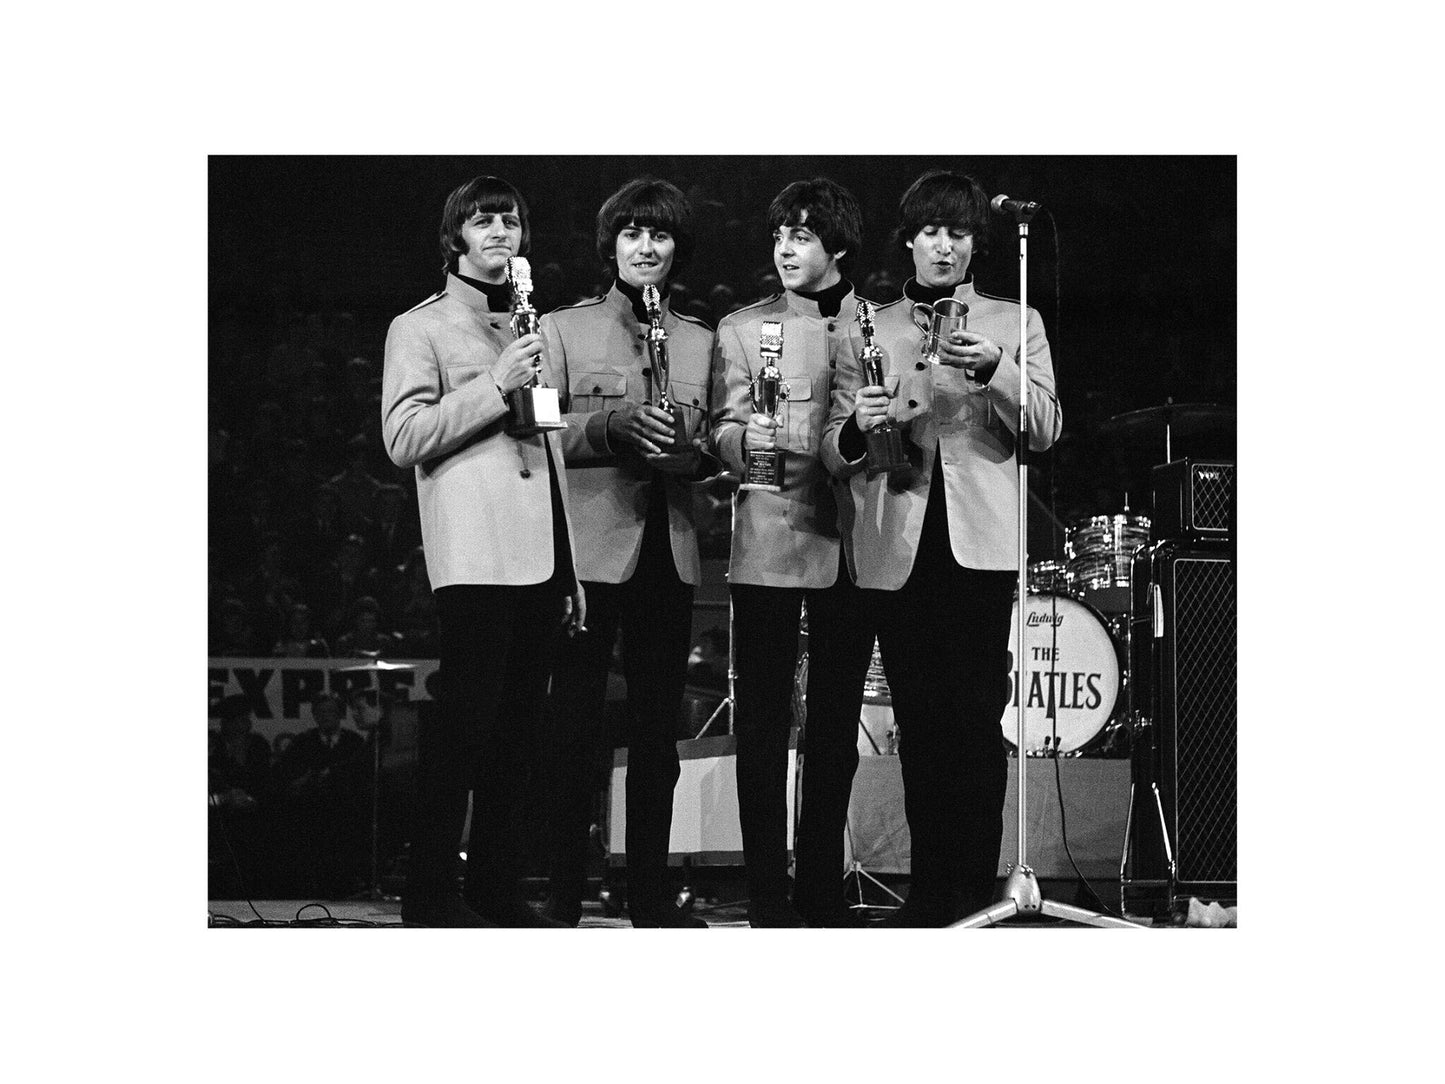 The Beatles - With Their NME Awards On Stage, England, 1965 Print